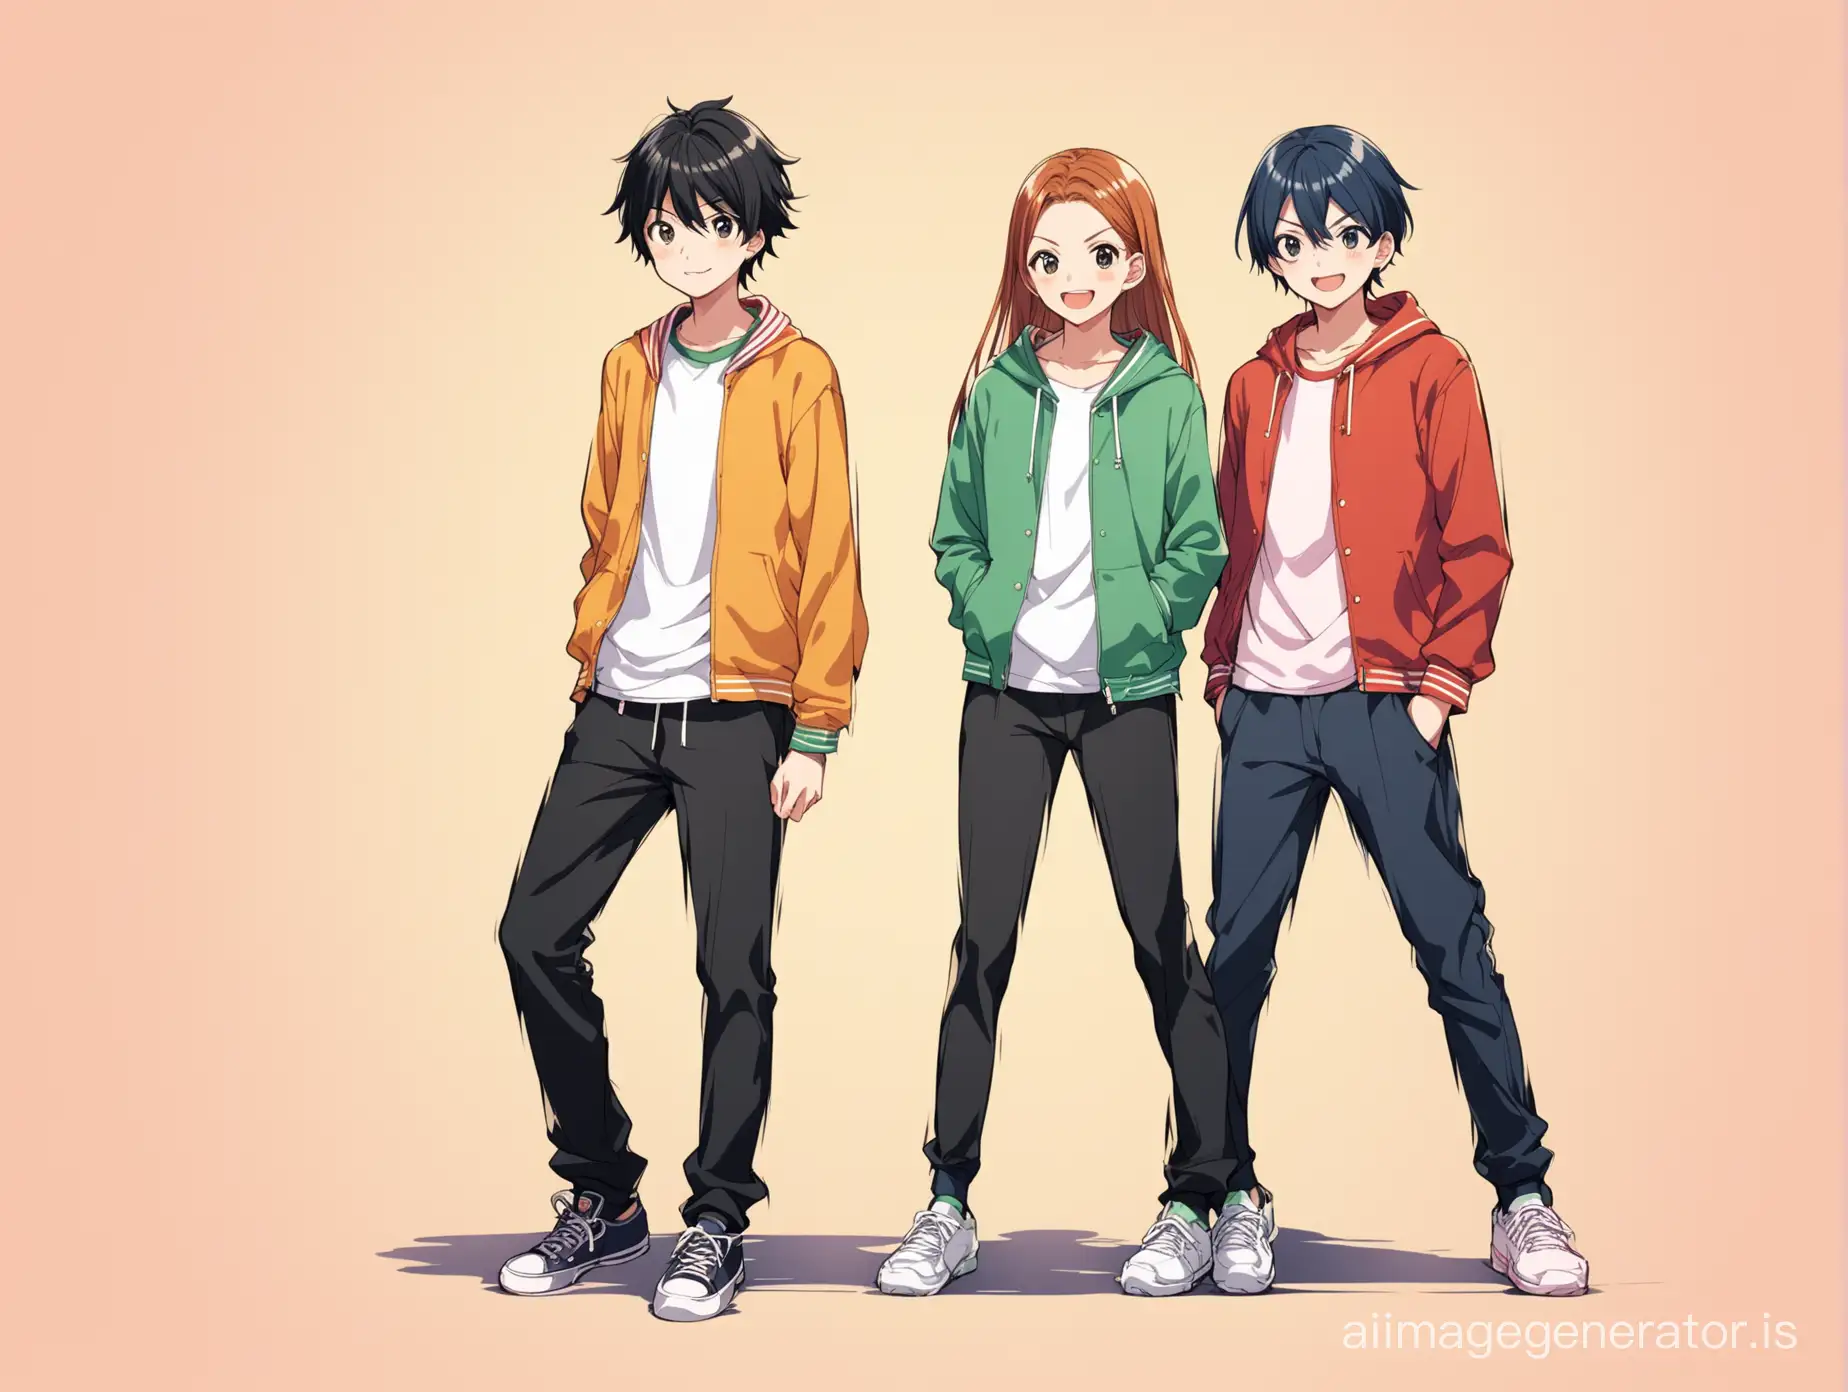 Two teenagers  standing where both are in a playful expression with standing normally but both the people have a distance between them physically in the image ,the image is without baground like as in a png format image. All the charecters are in Anime format